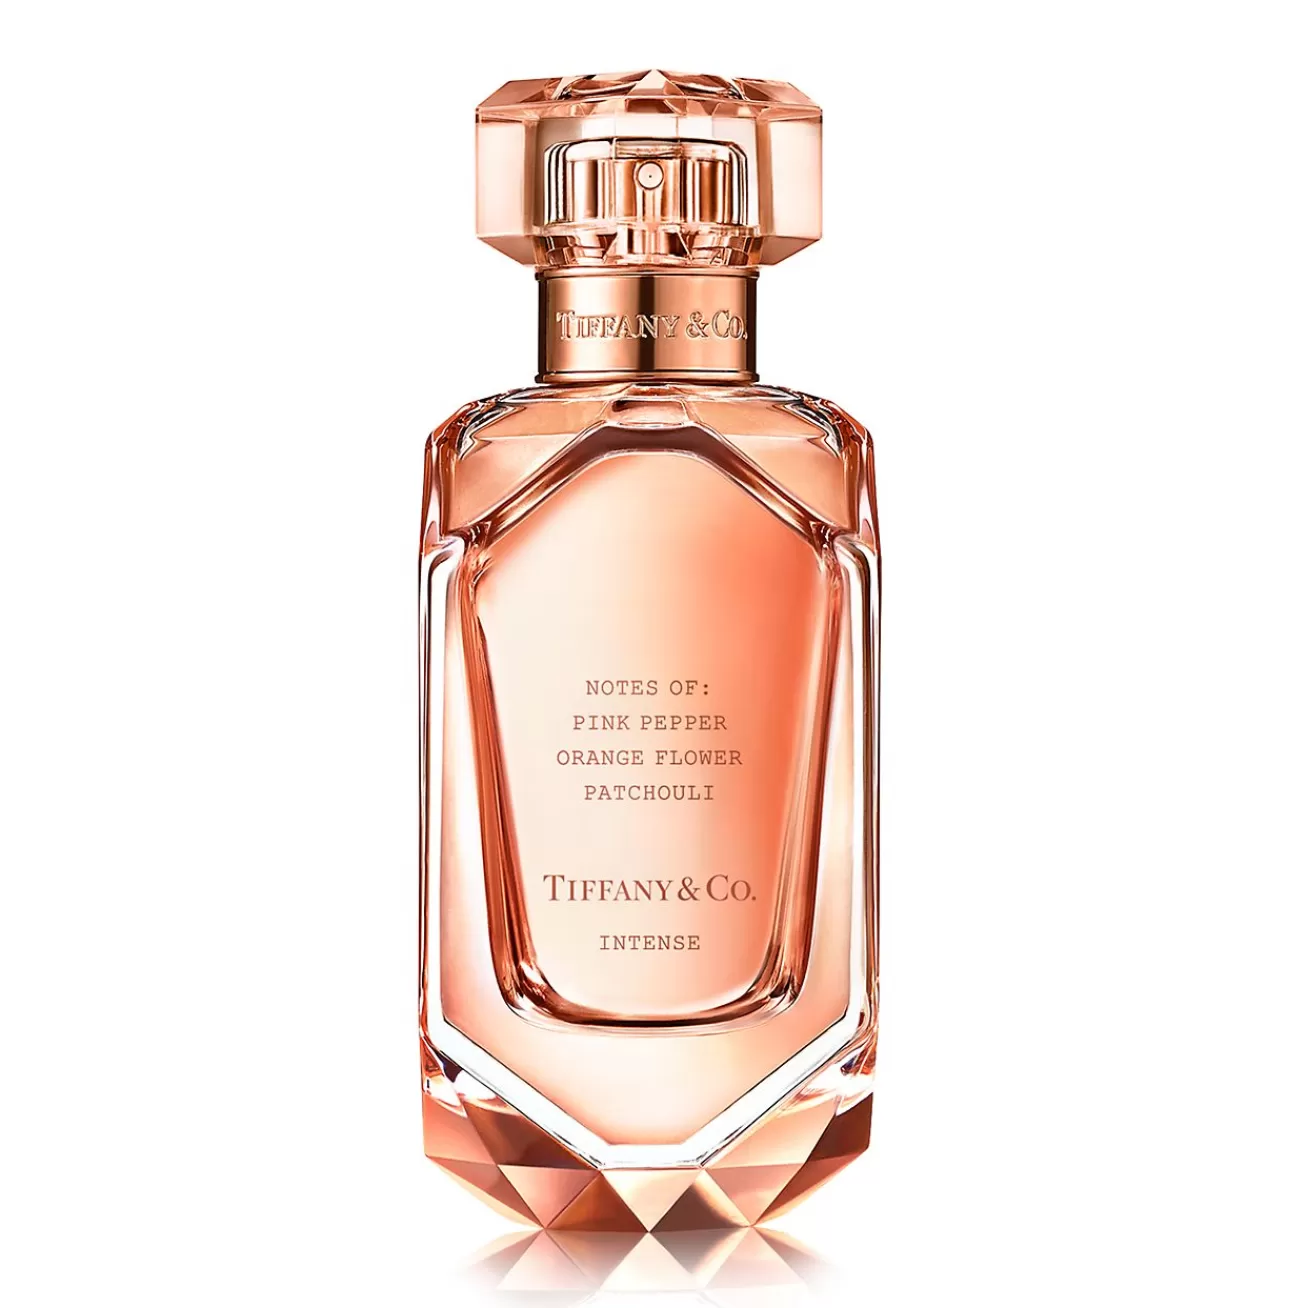 Tiffany & Co. Rose Gold Intense Eau de Parfum | ^ Gifts $1,500 & Under | Gifts to Personalize